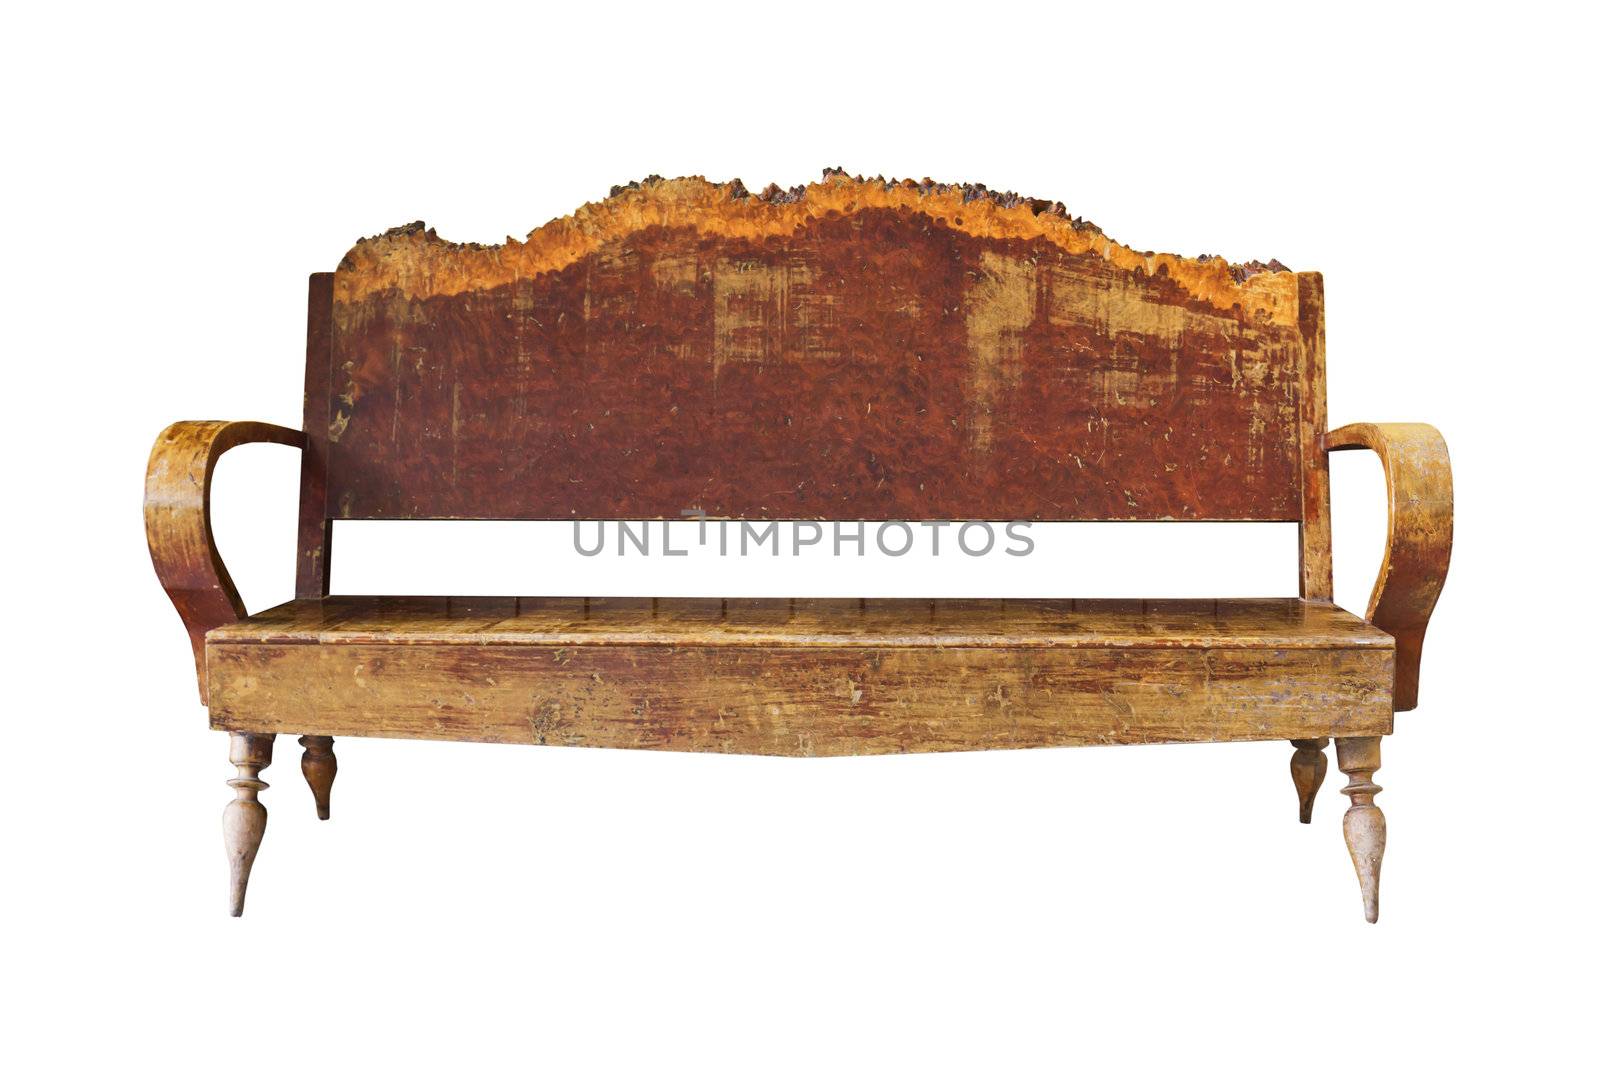 Old Wooden arm chair isolated on the white